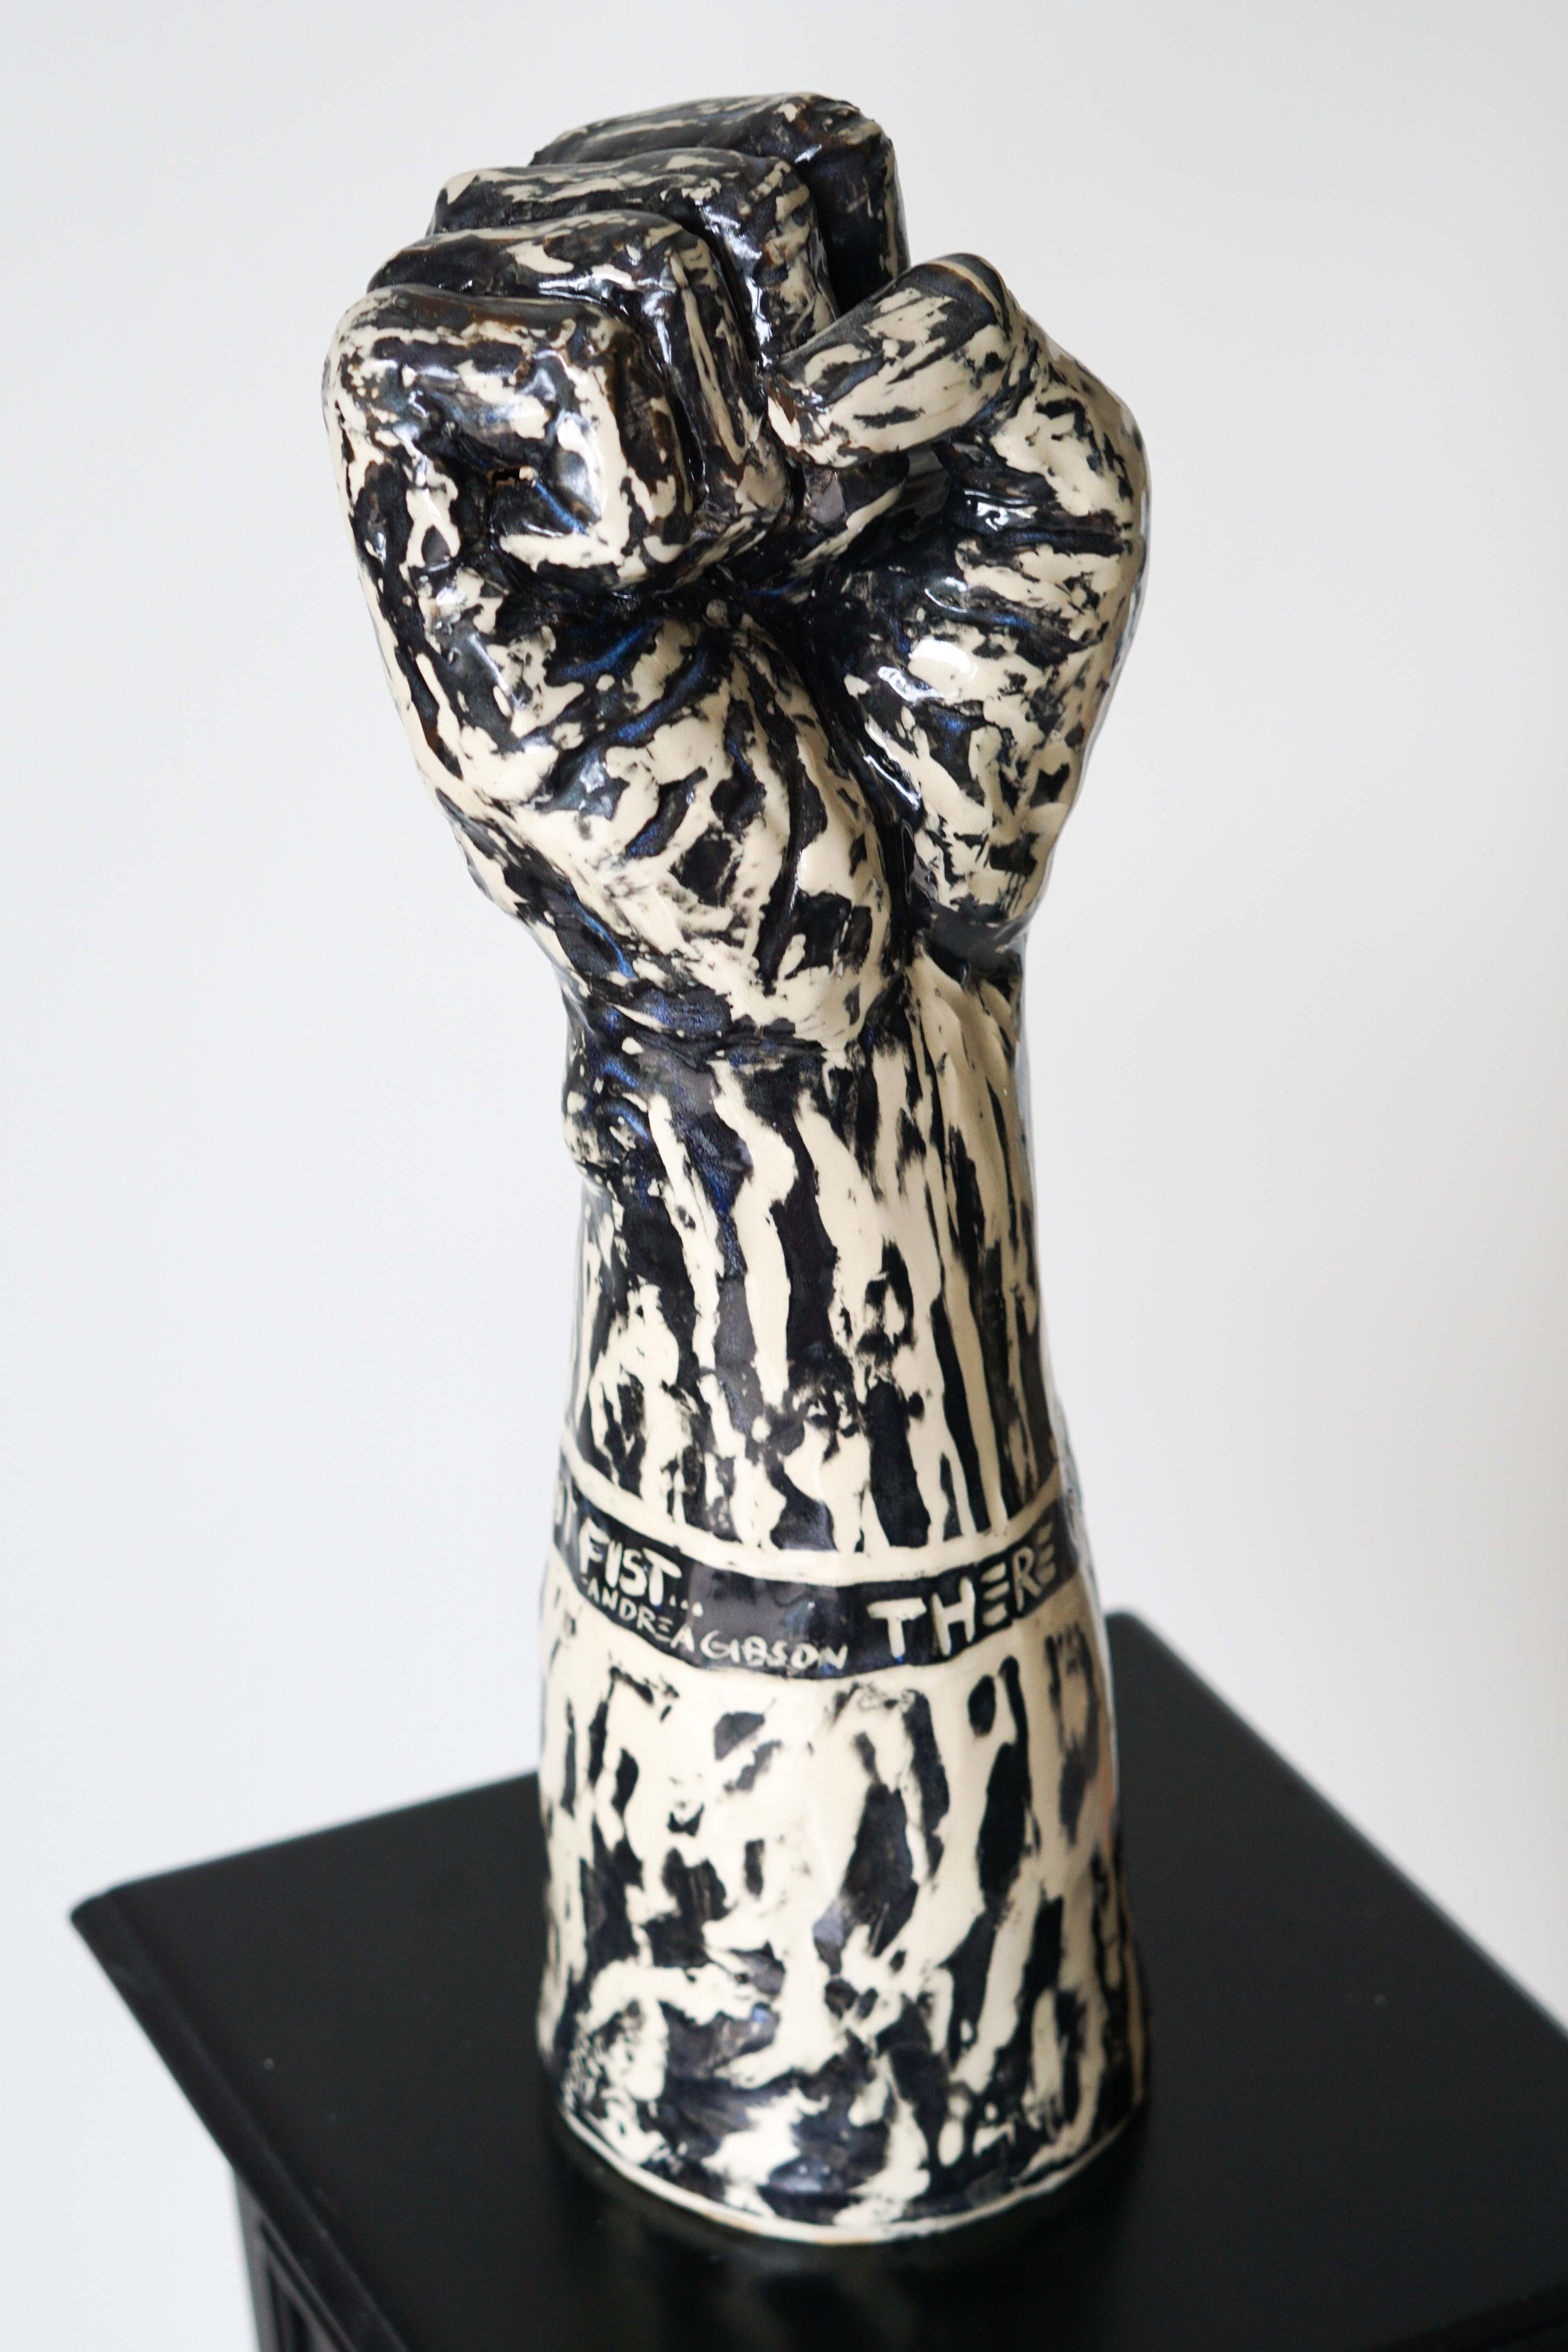 Fist is Not a Fight Ceramic Sculpture with under Glaze Sgraffito 12